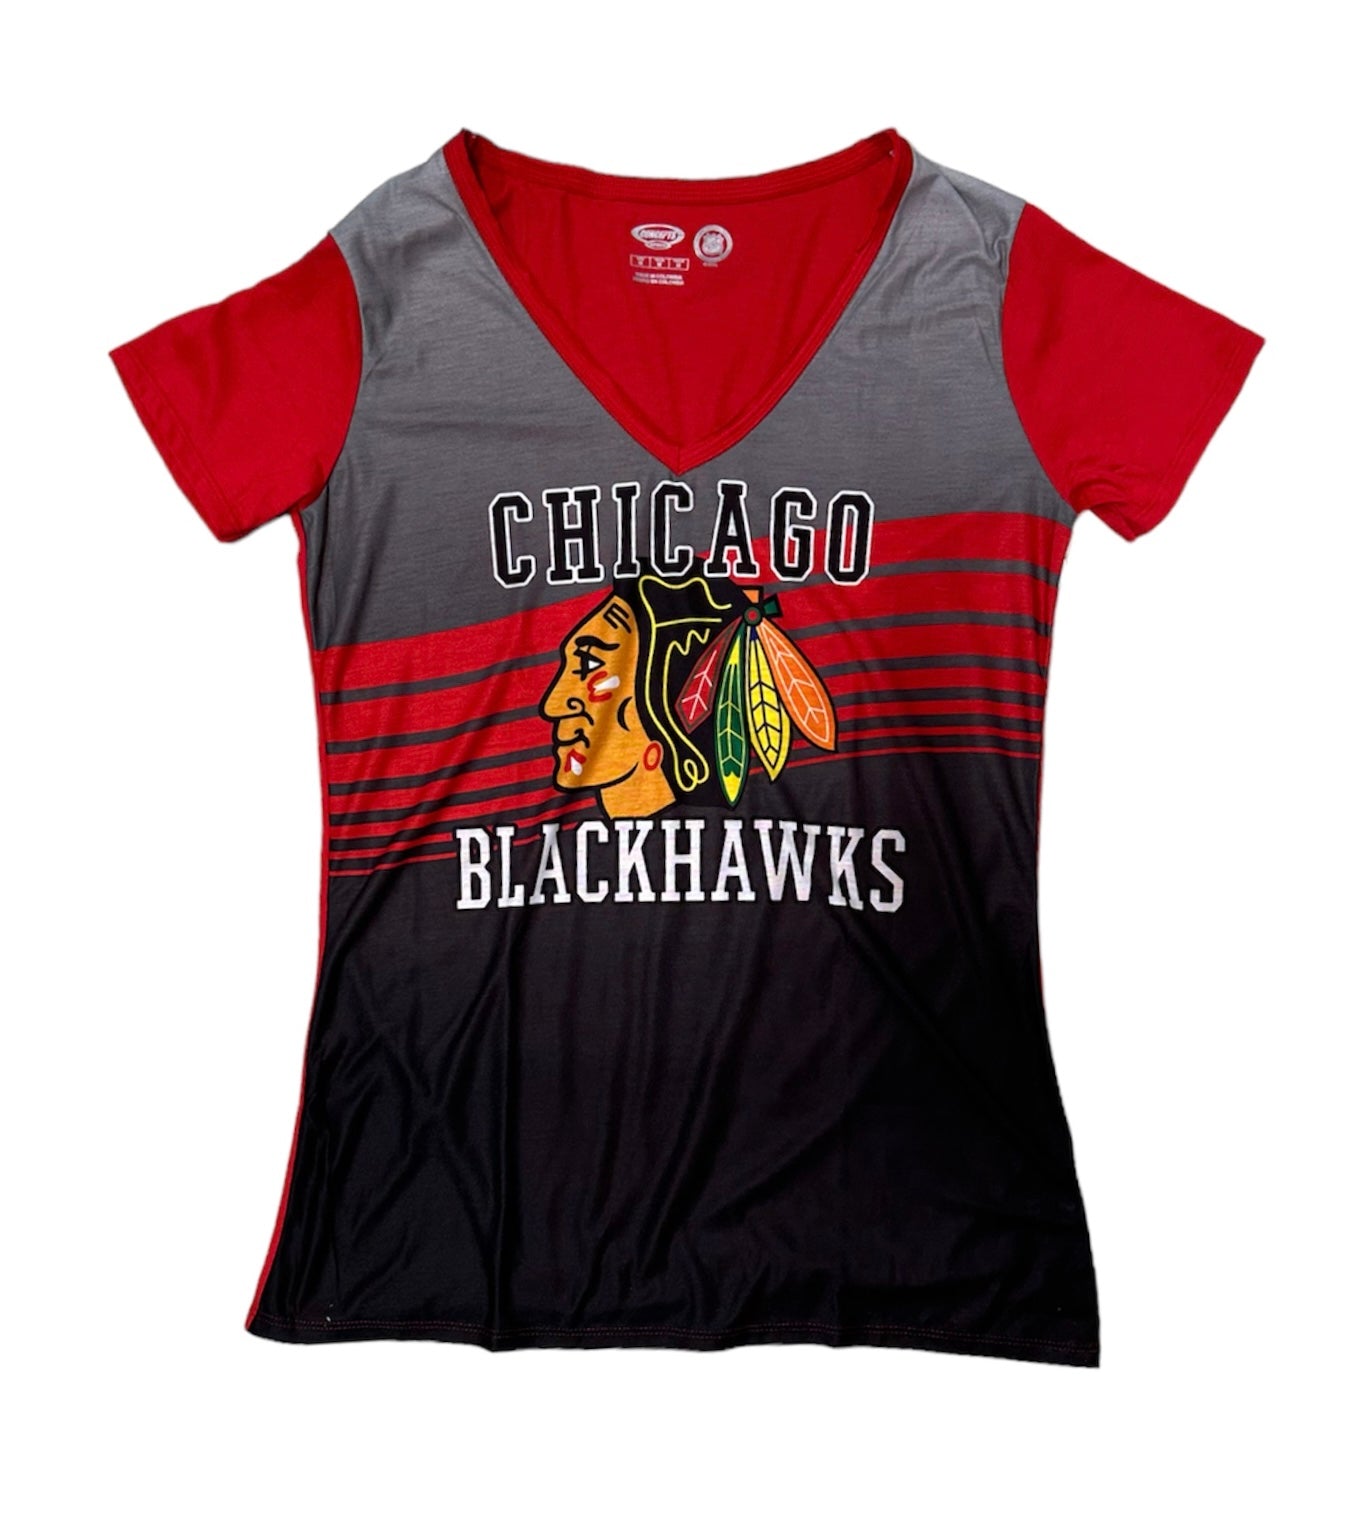 Women's Chicago Blackhawks Concepts Sport Gray/Red Dynamic Short Sleeve Top